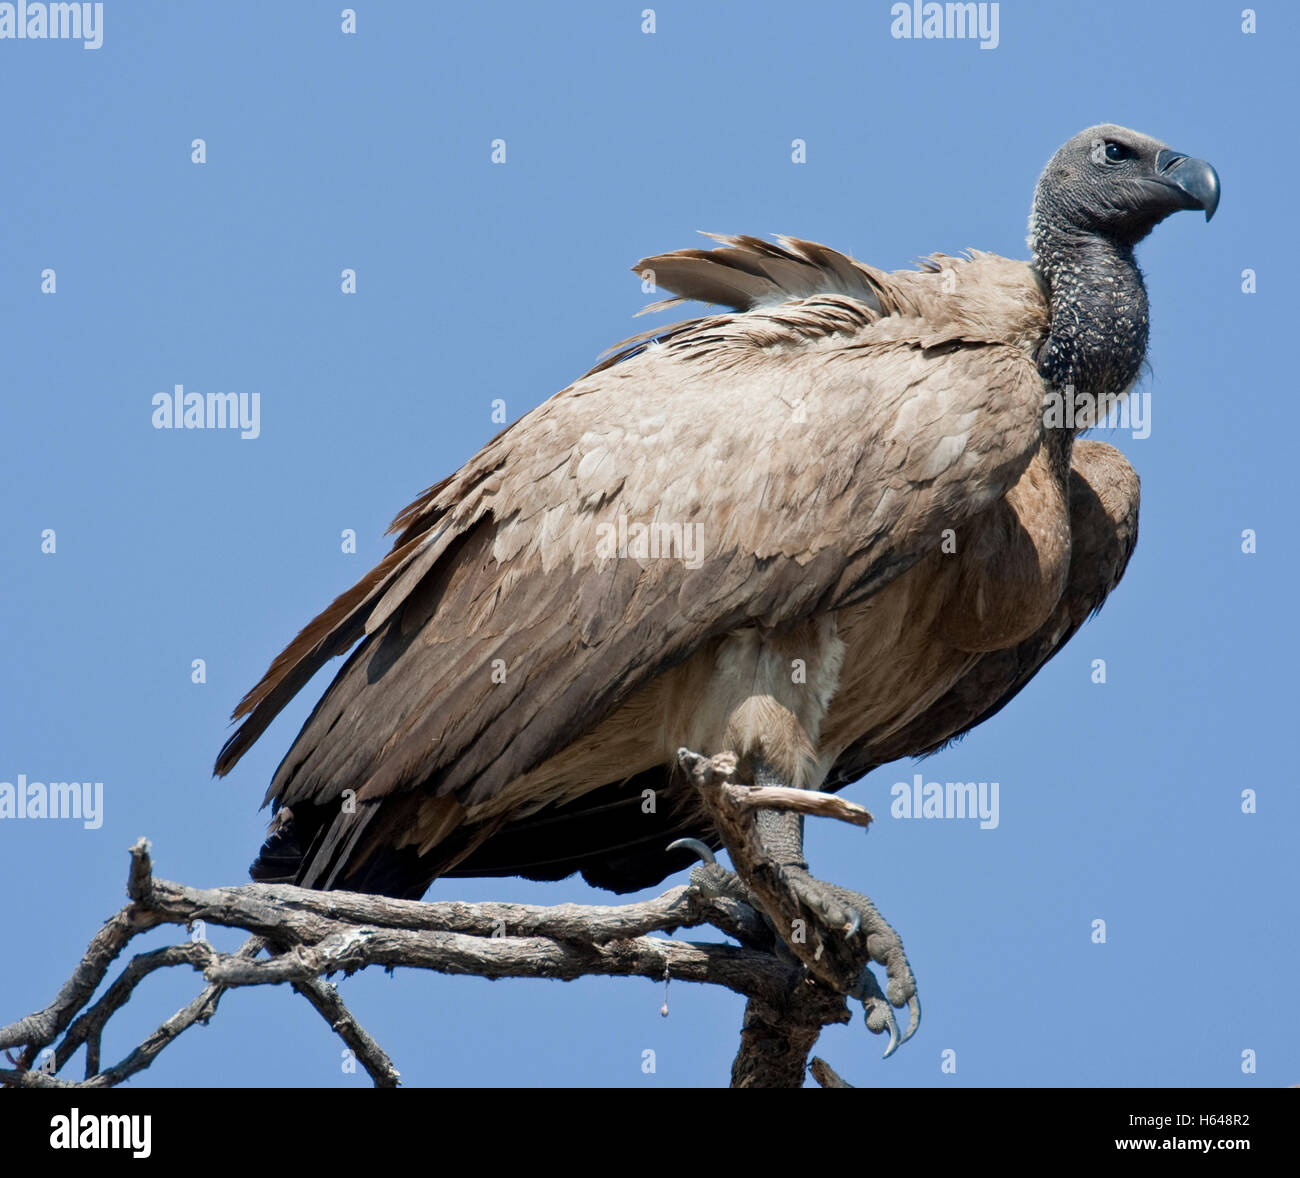 Cape Vultures (Gyps coprotheres), Chobe National Park, Botswana, Africa Stock Photo